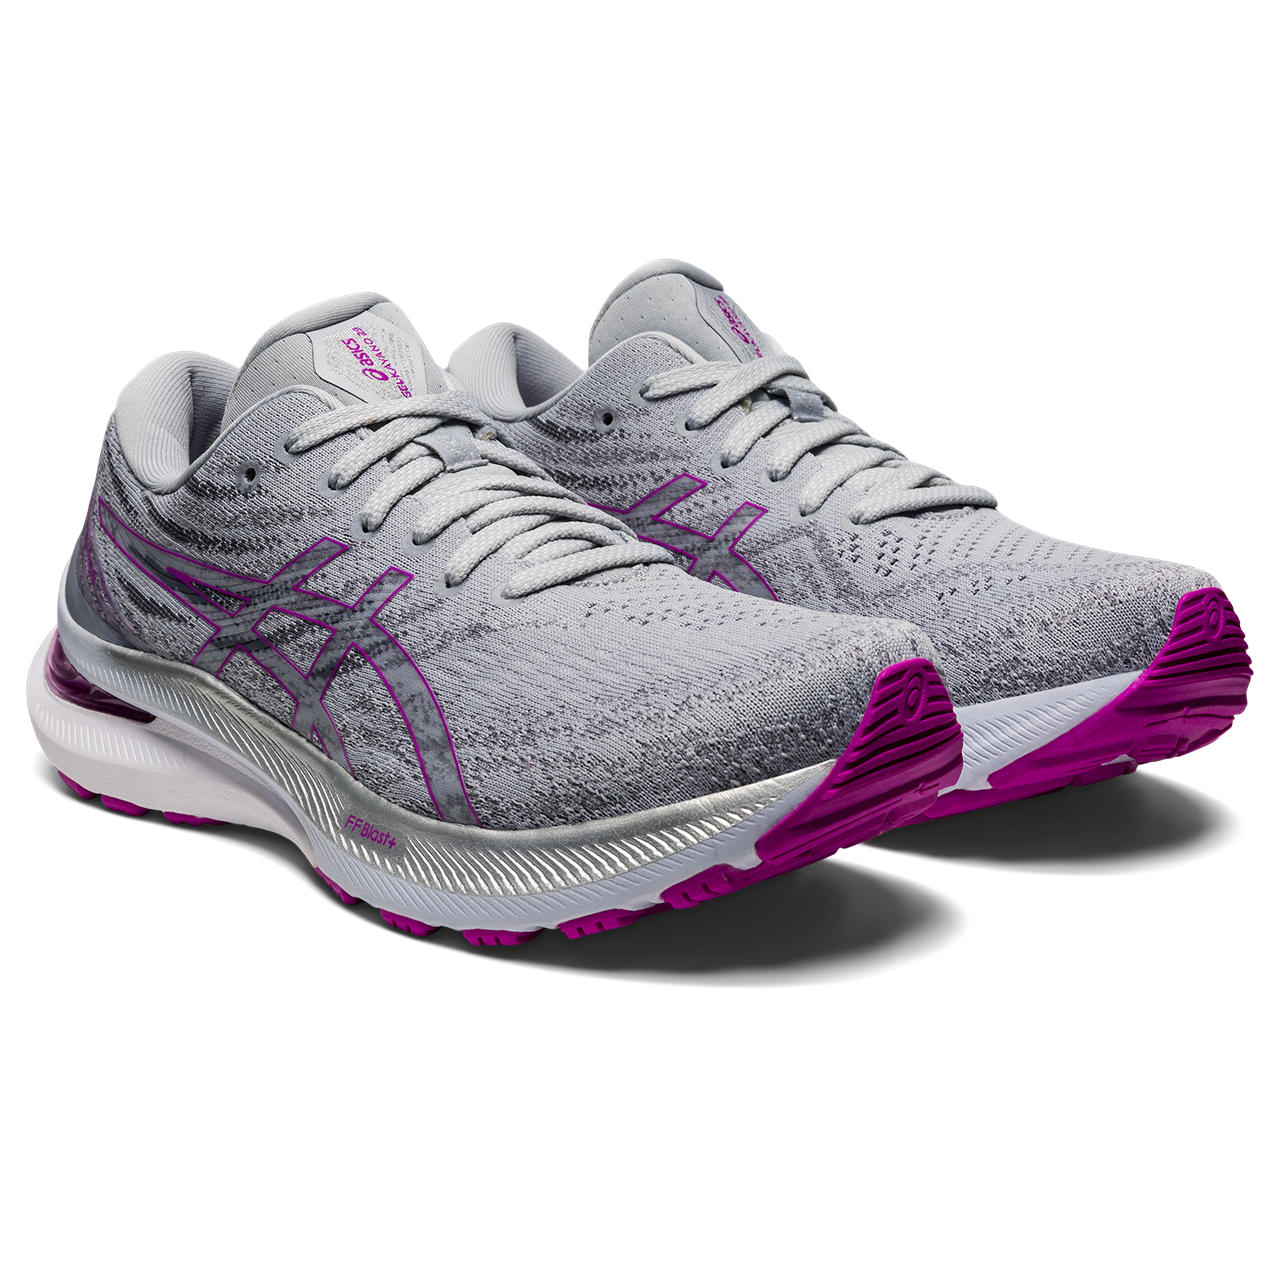 The Women's Gel-Kayano 29 creates a stable running experience and a more responsive feel underfoot. Featuring a low-profile external heel counter, this piece comfortably cradles your foot with advanced rearfoot support.